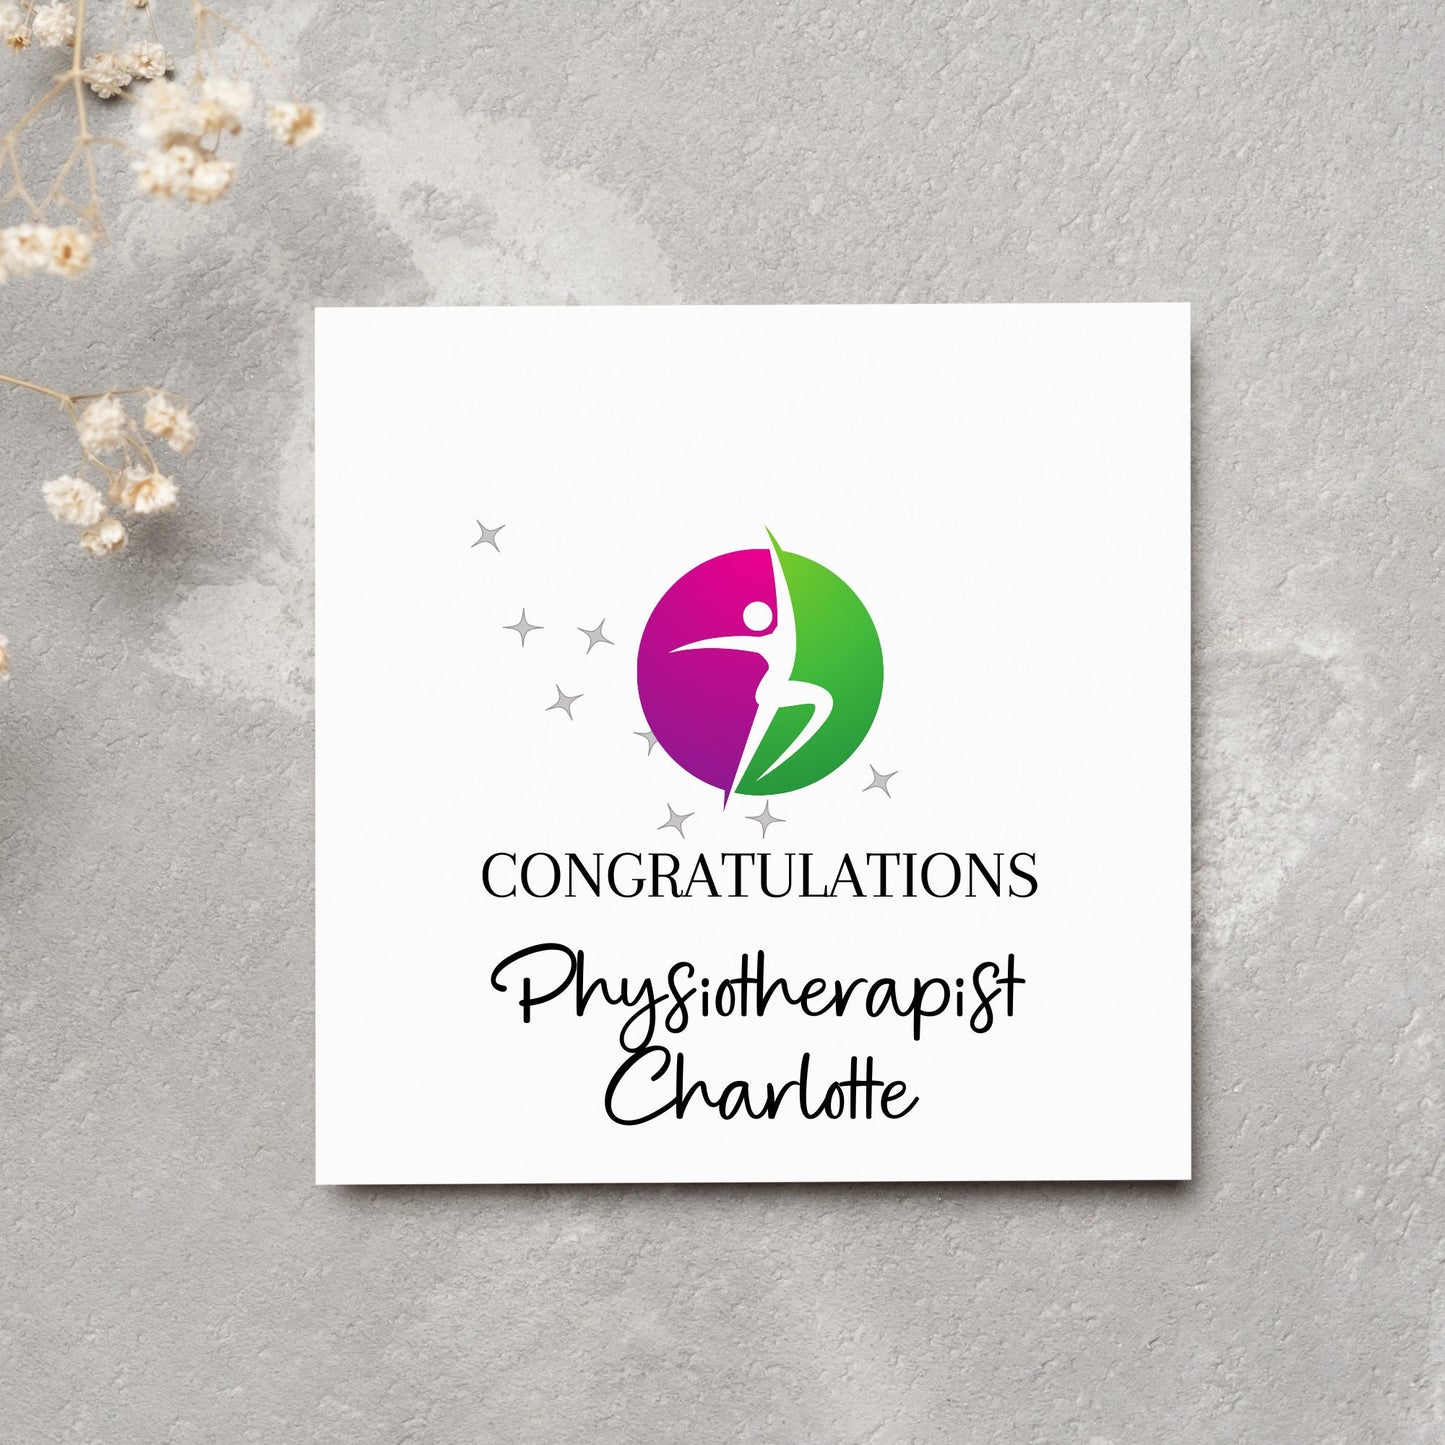 Physiotherapist Card, Personalised Physio Card, Physio Graduation Card, Congrats New Physio Job, Friend Physio Cards